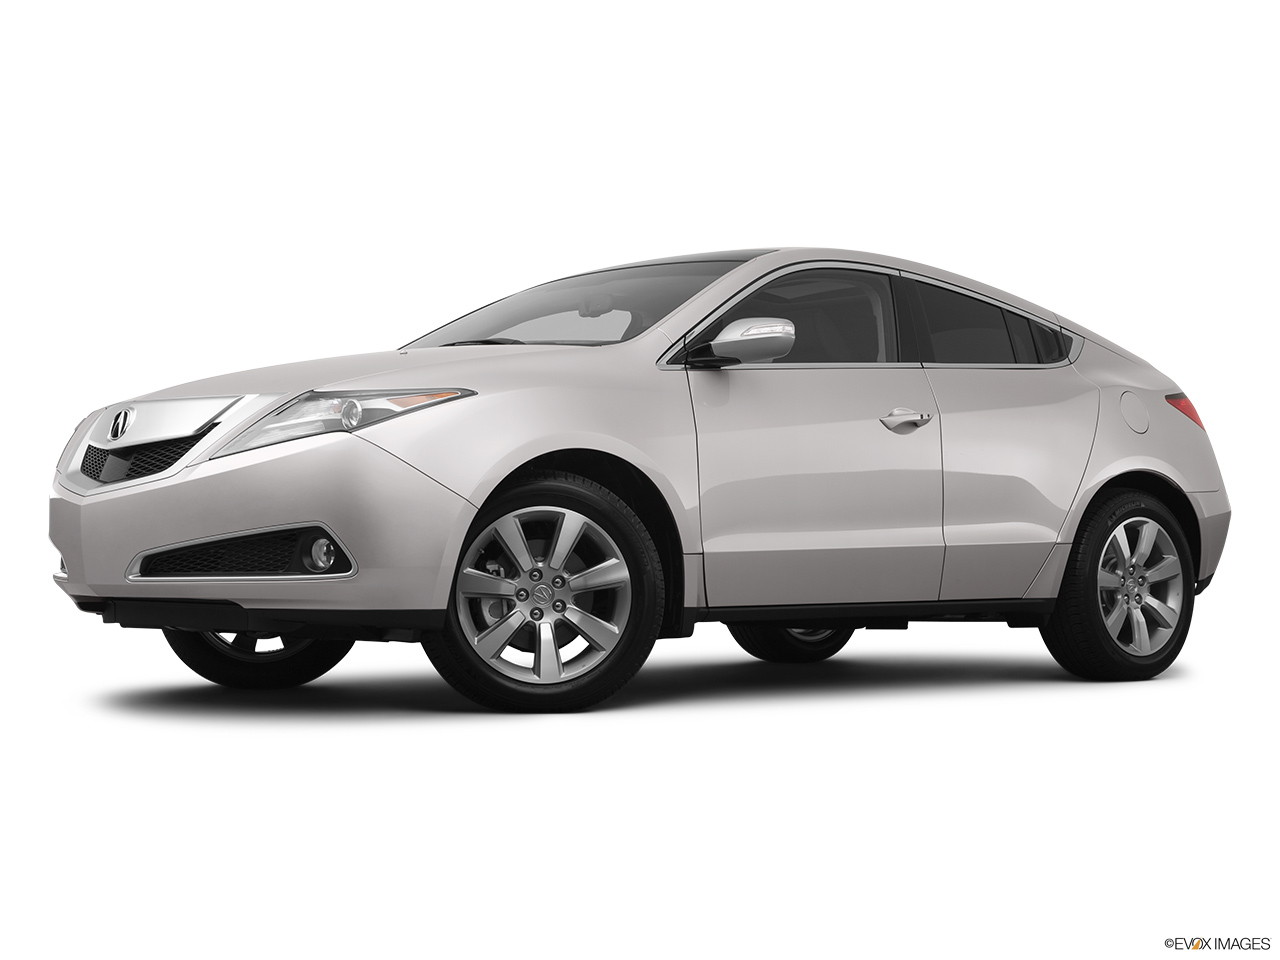 2012 Acura ZDX ZDX Advance Low/wide front 5/8. 